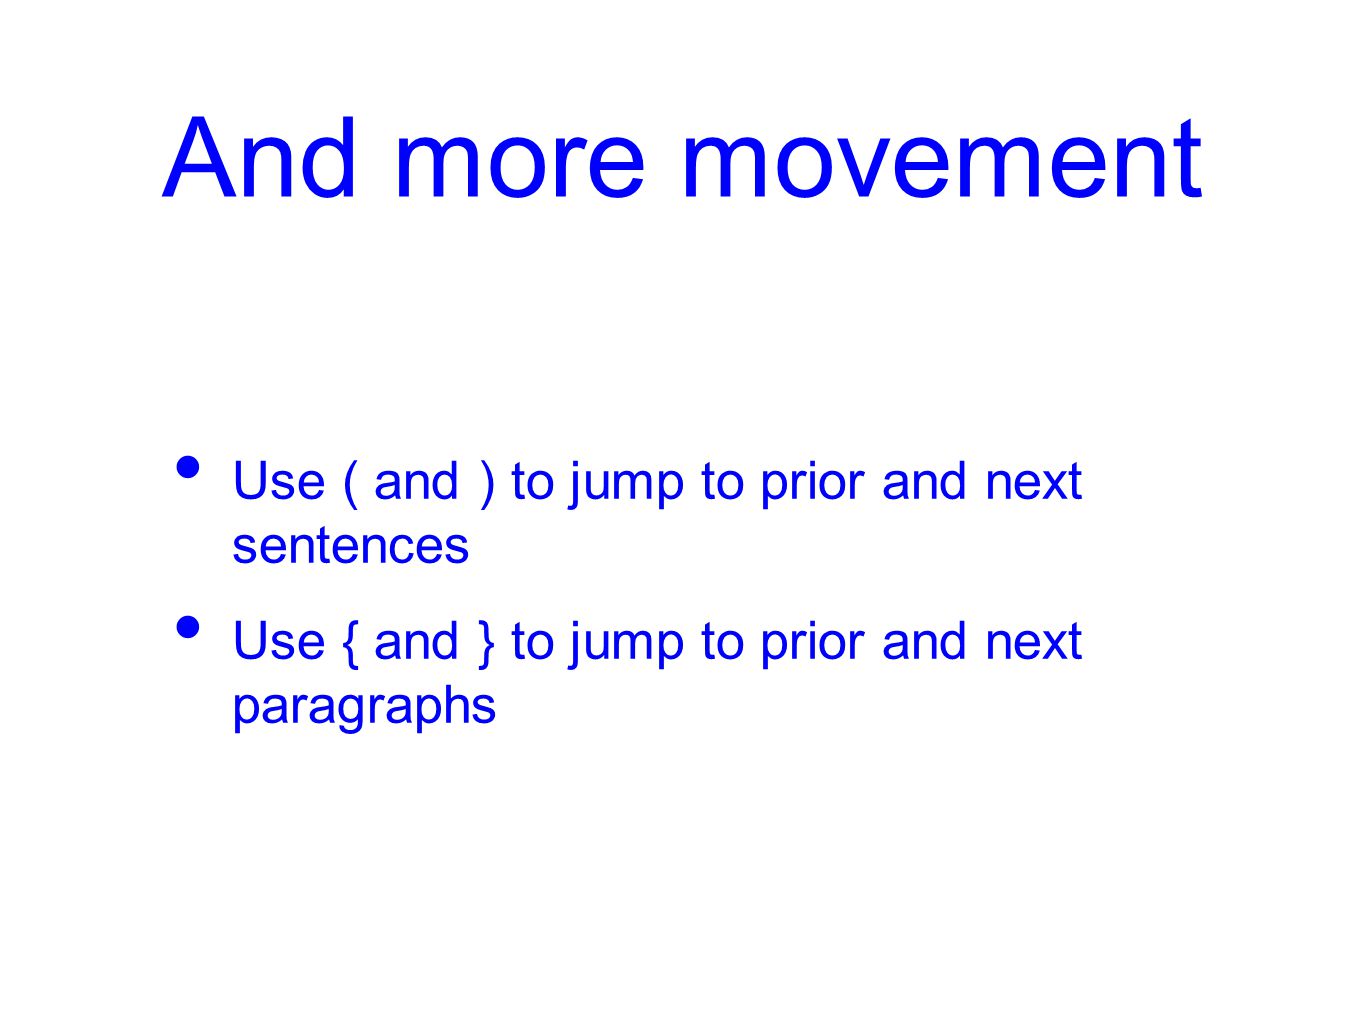 And more movement Use ( and ) to jump to prior and next sentences Use { and } to jump to prior and next paragraphs